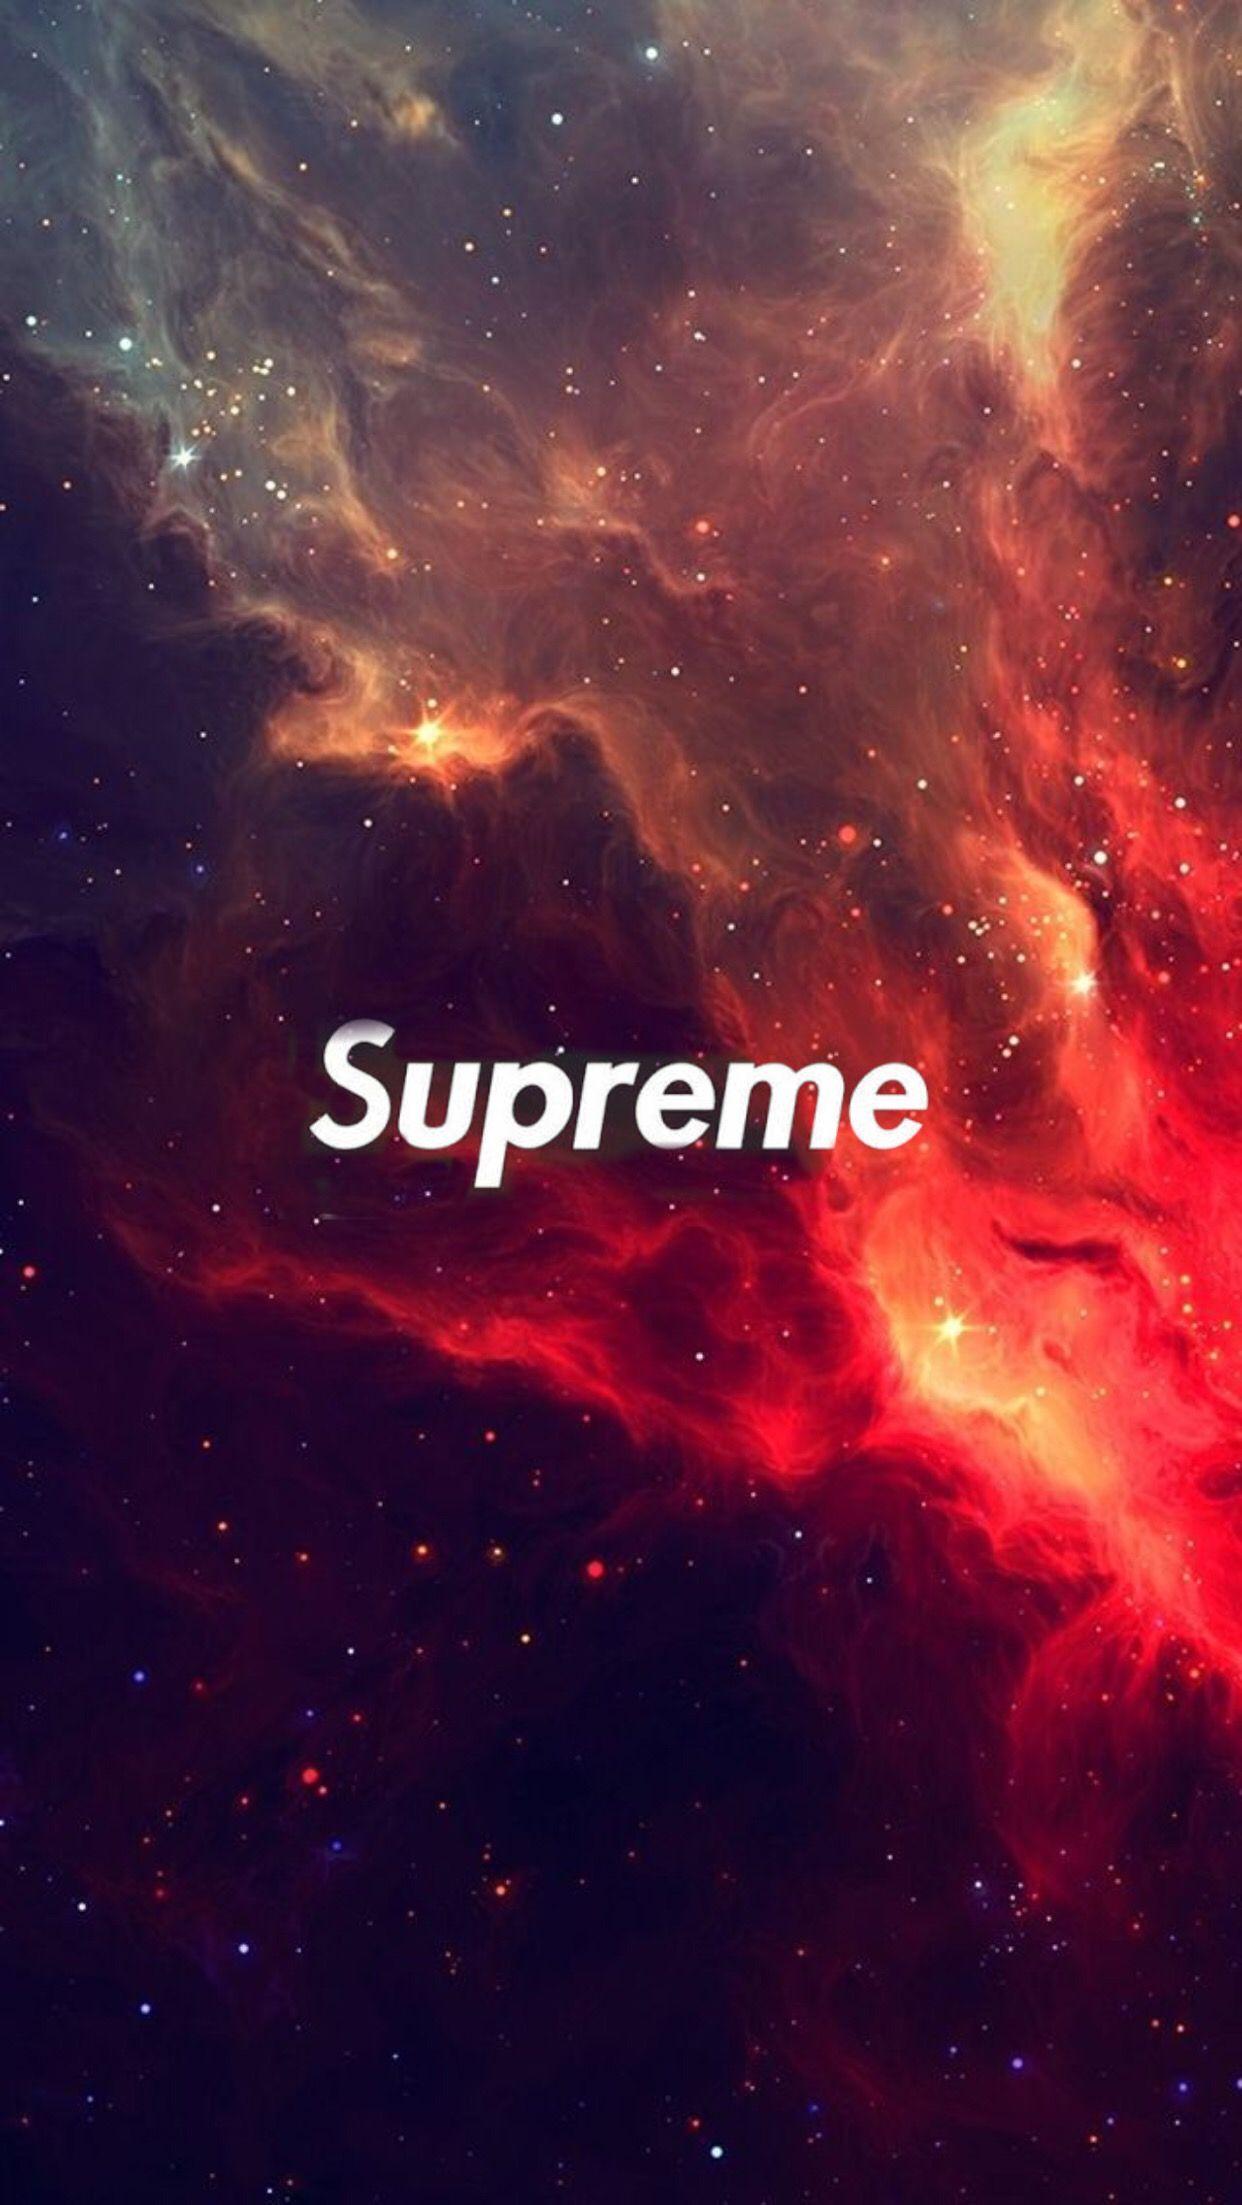 Supreme Galaxy Wallpapers Top Free Supreme Galaxy Backgrounds